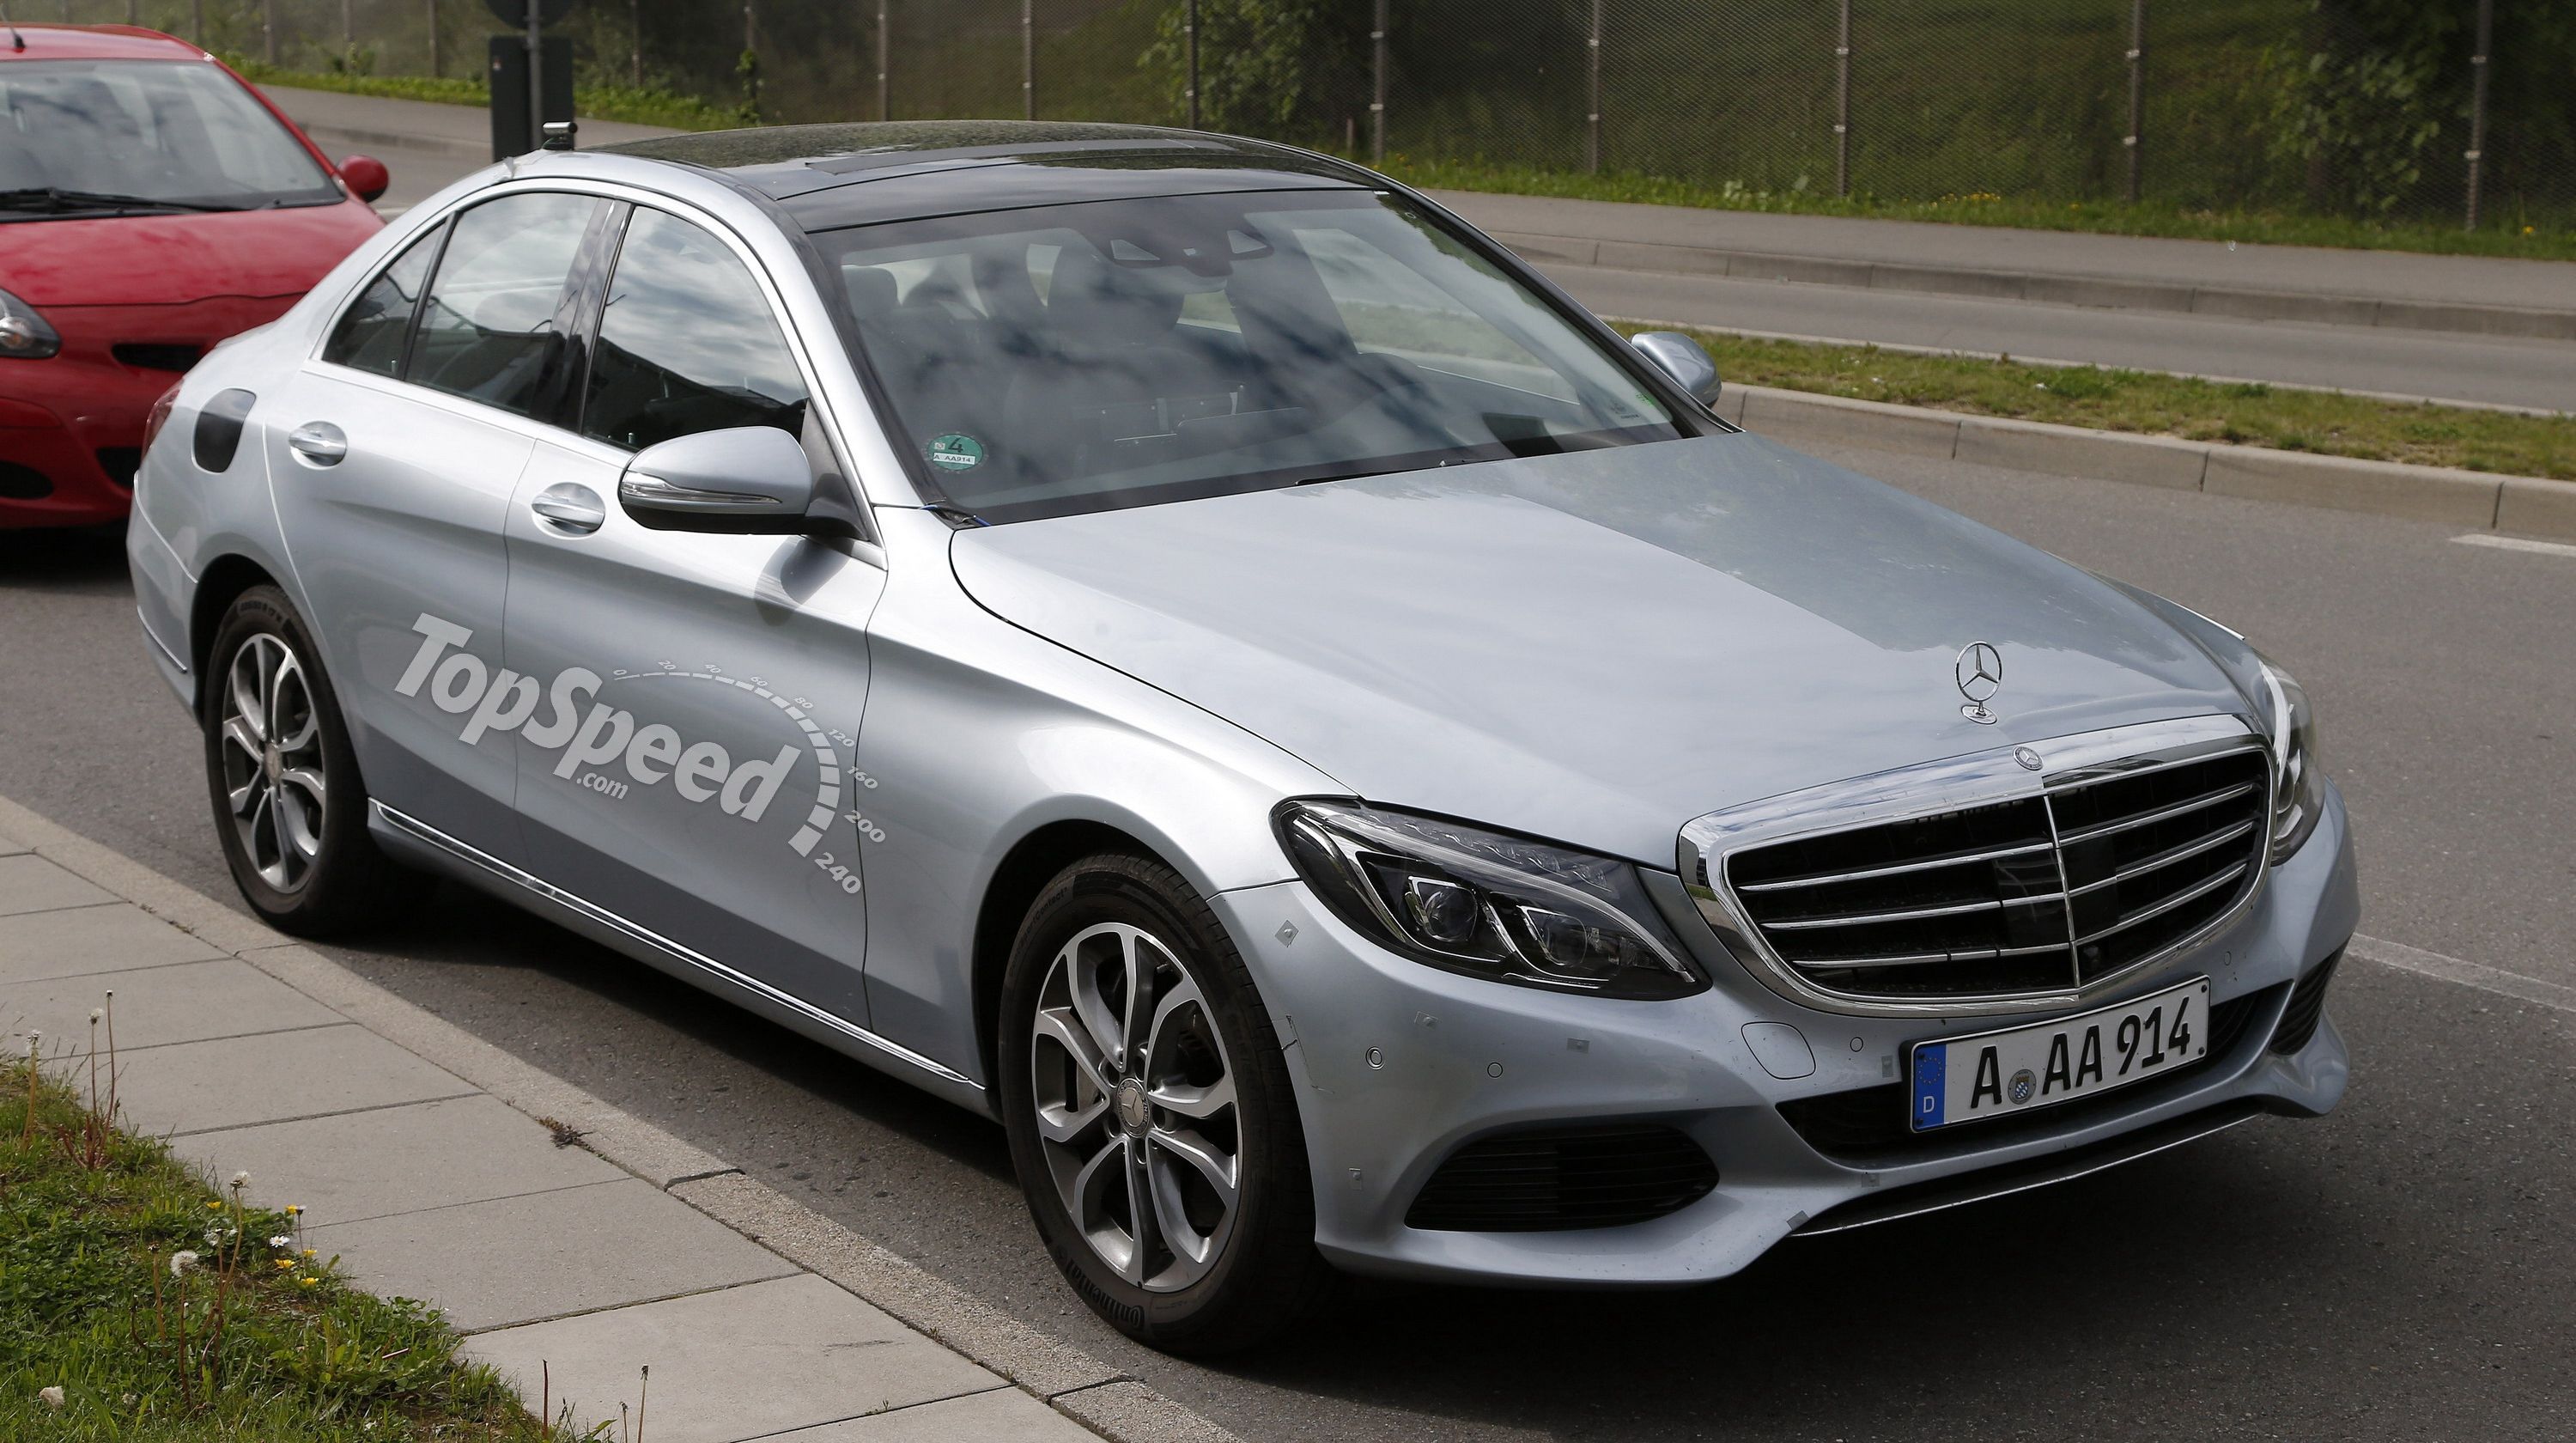 We now have some details on the upcoming C350e Plug-In Hybrid that will reportedly hit the market in 2015. See all of the details at TopSpeed.com.